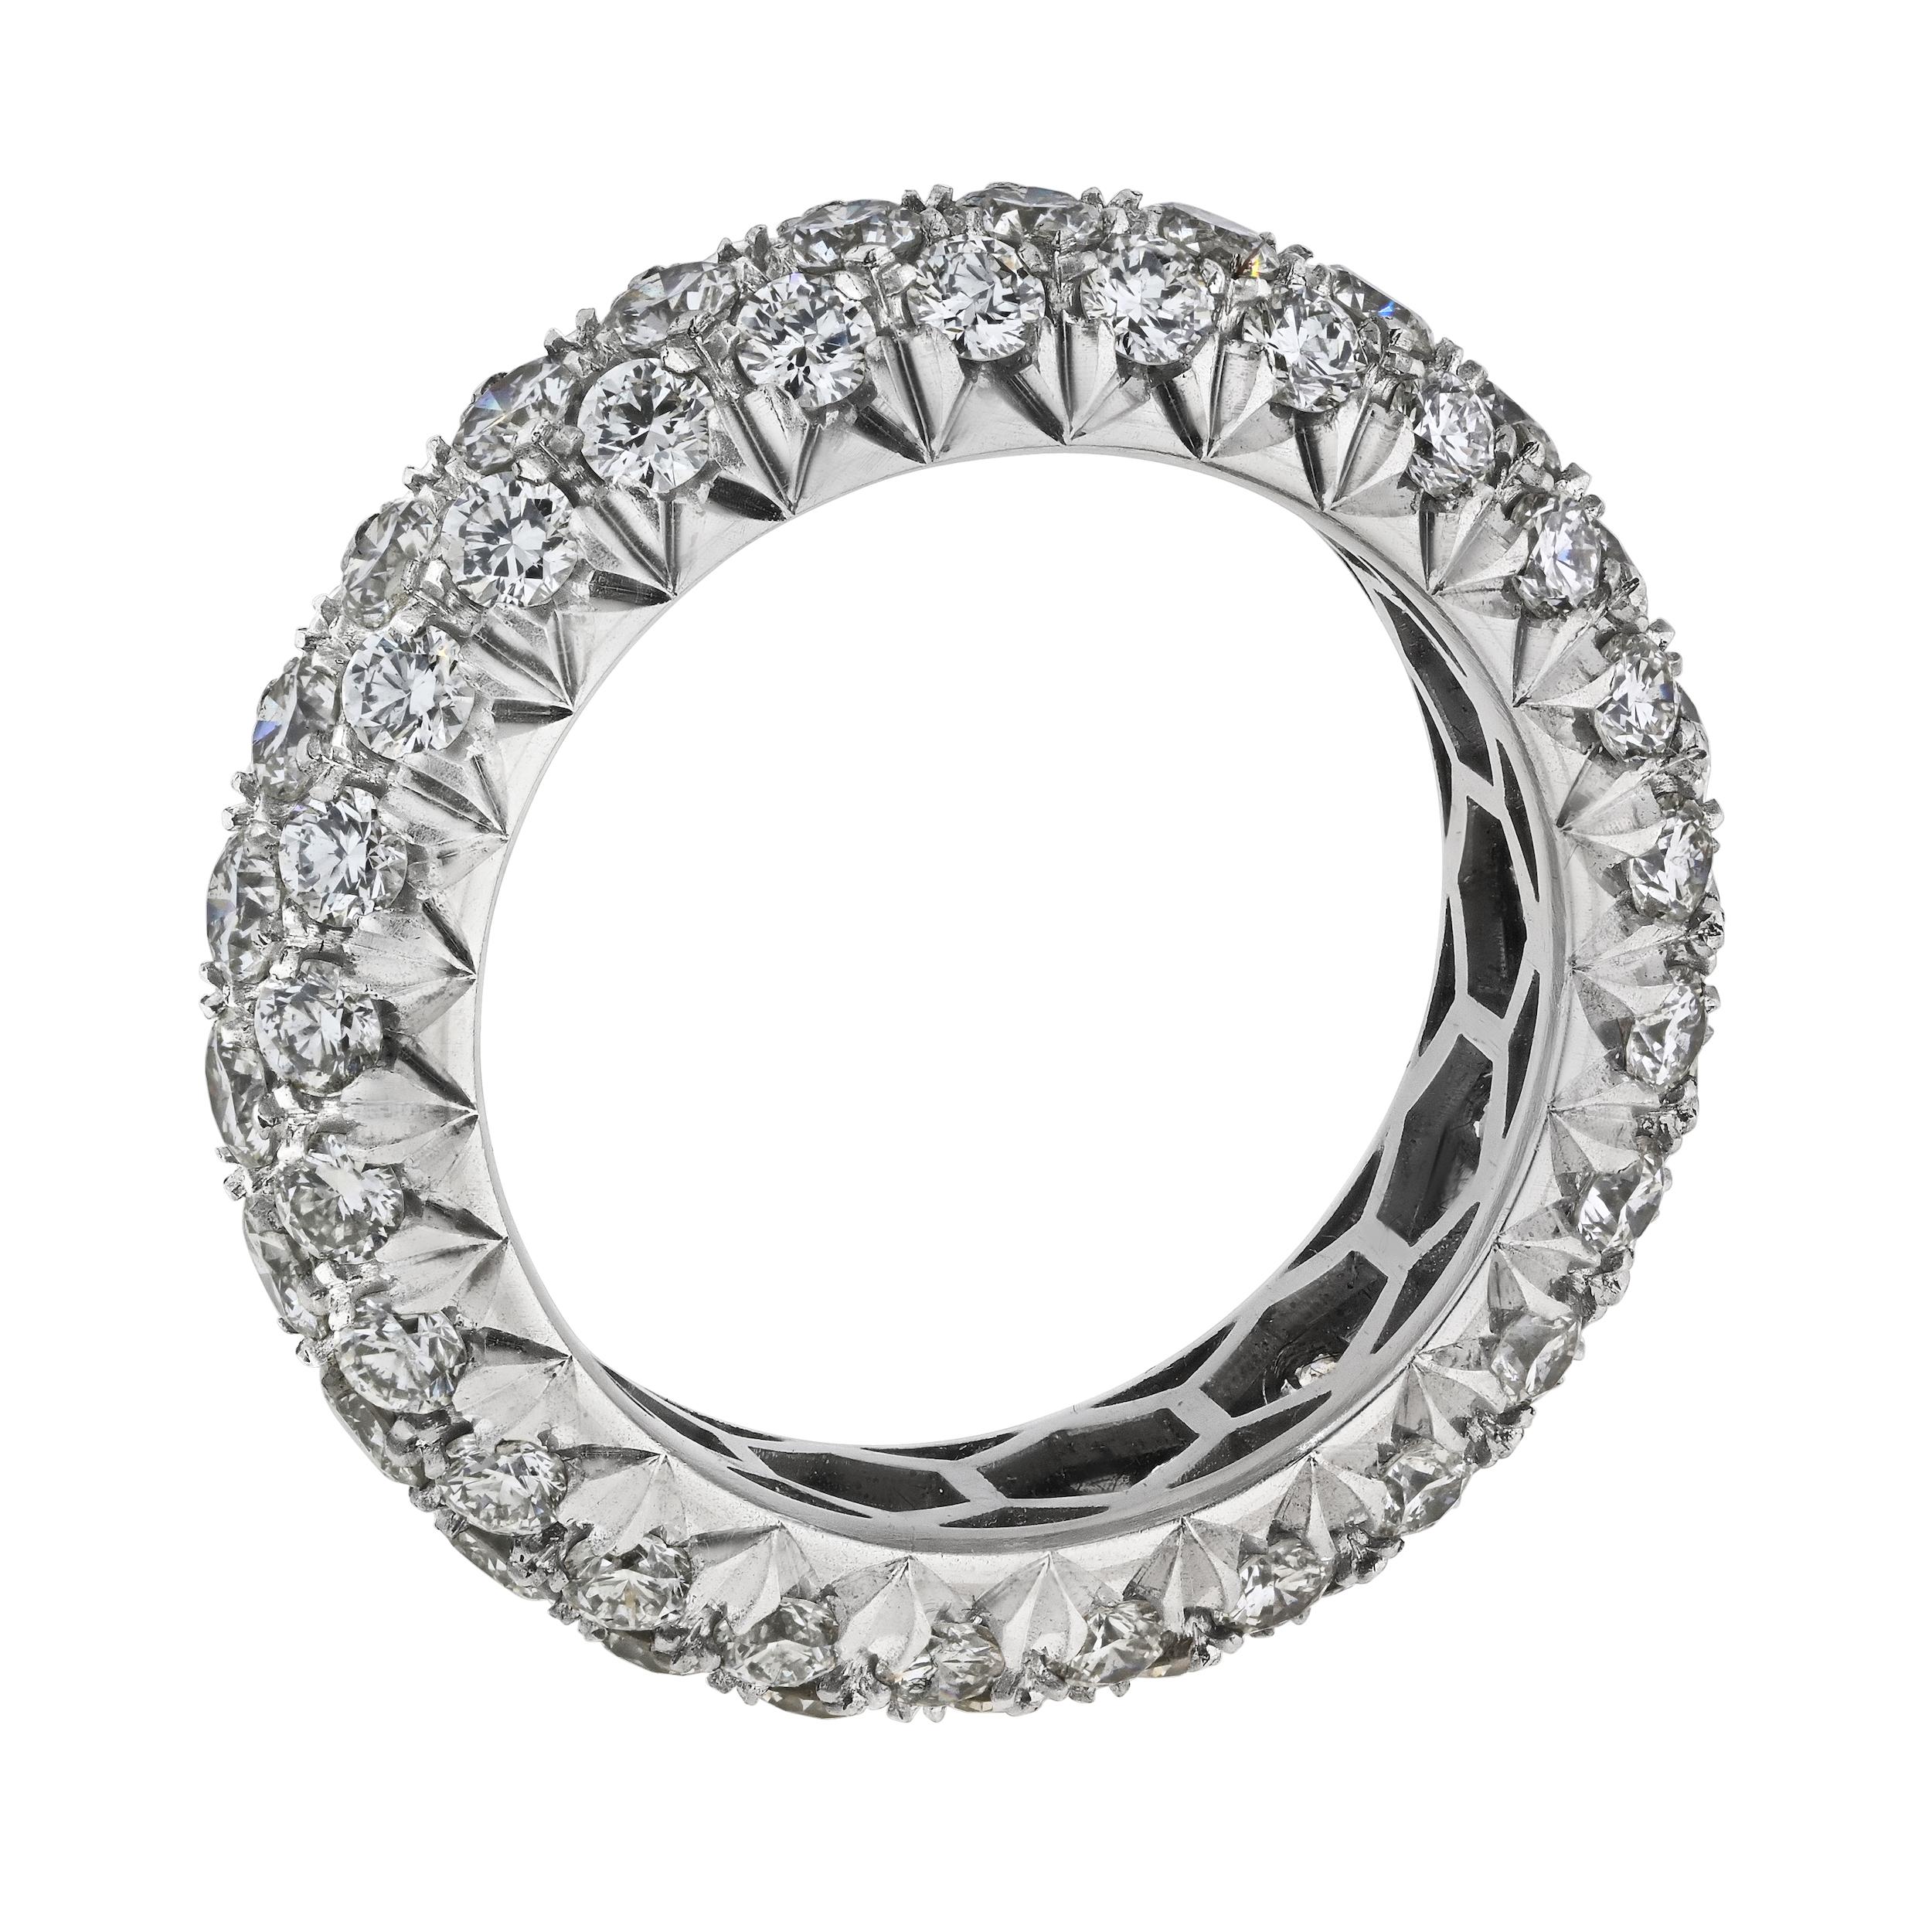 Indulge in the timeless elegance of this handmade platinum diamond eternity band. Skillfully crafted, the band features three rows of round pave-set diamonds, creating a captivating multi-row design. With a width of approximately 6mm and a height of